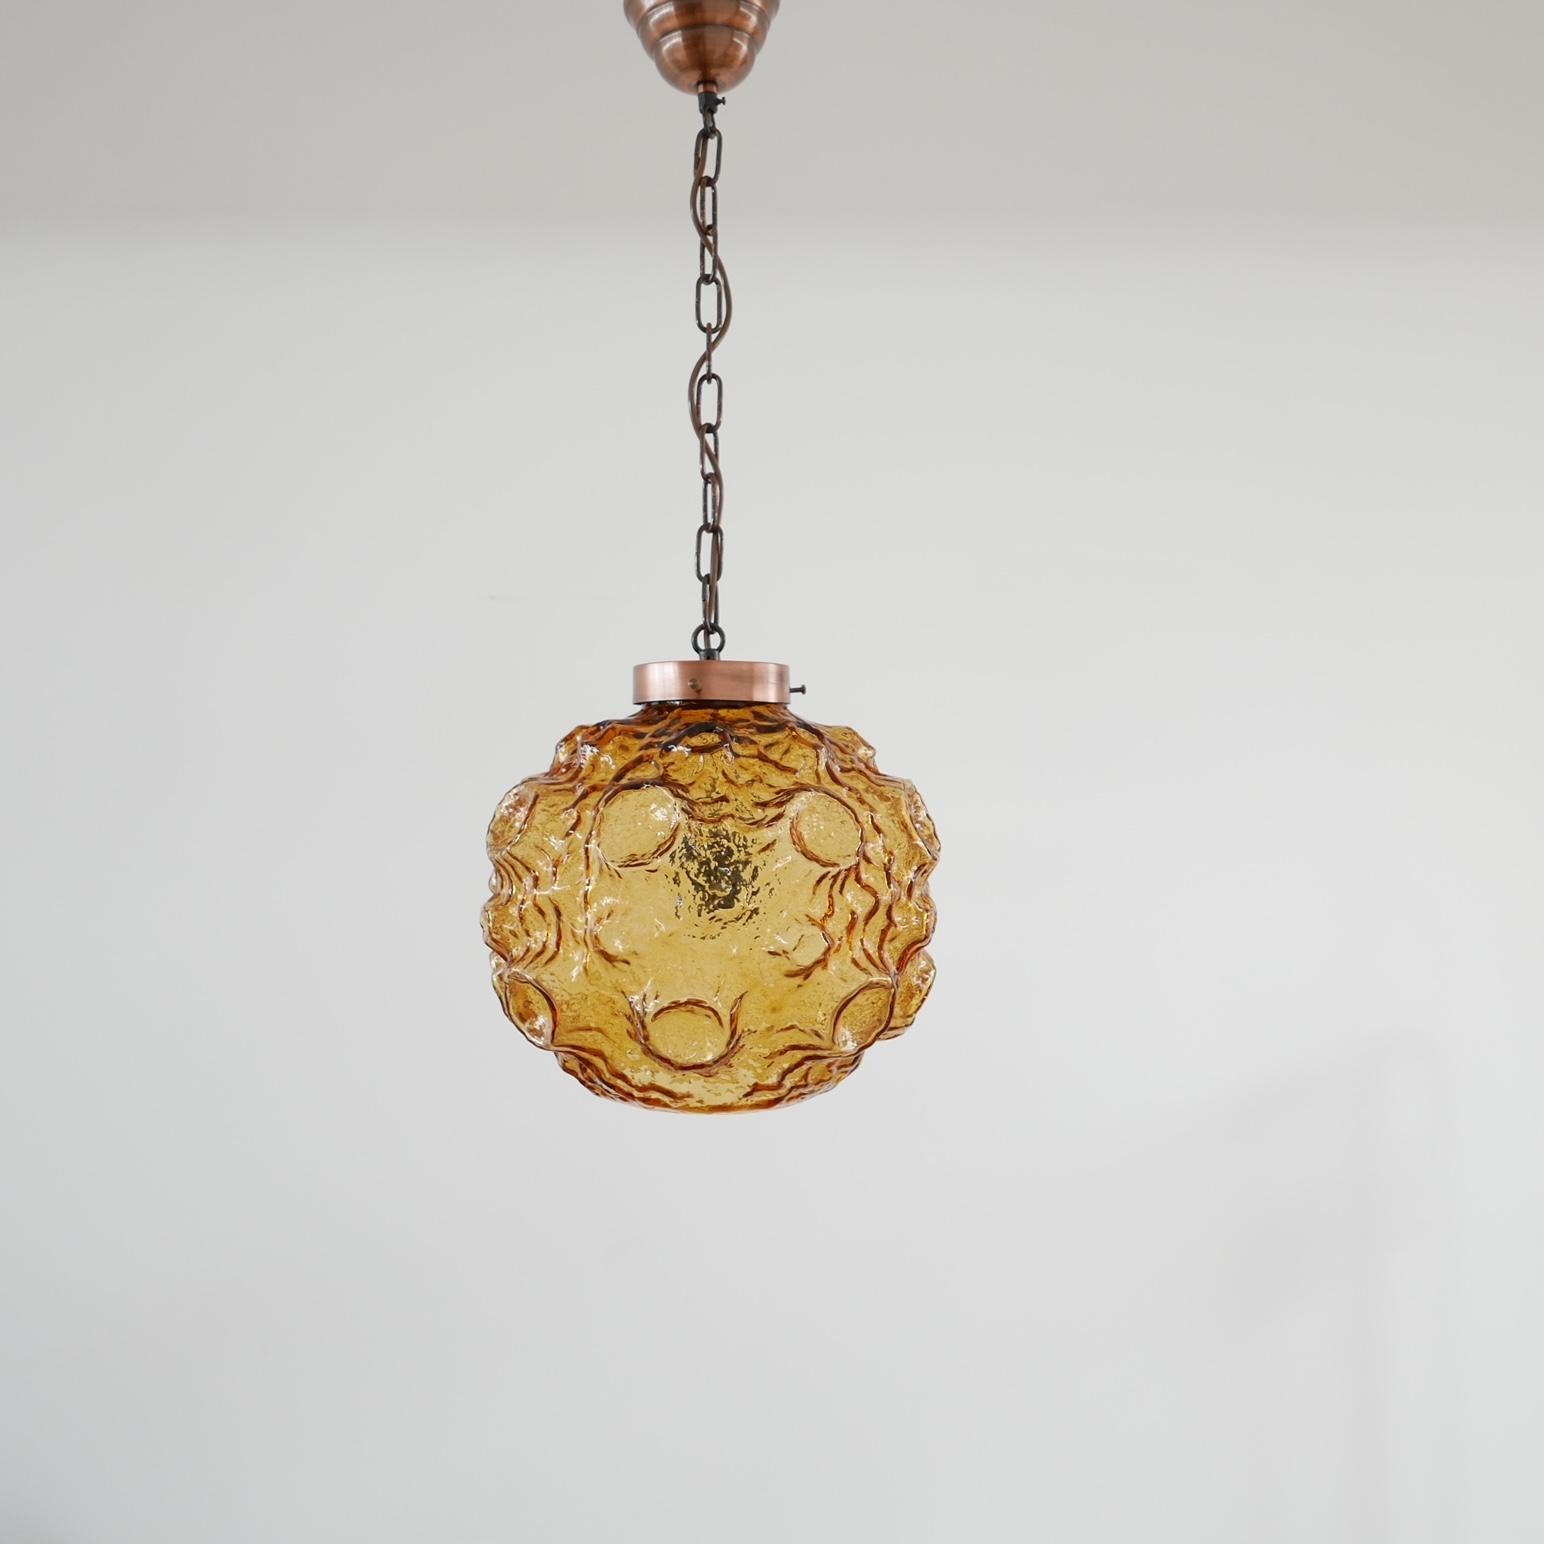 An almost lunar landscape style glass pendant in distintive yellow.

Denmark, c1970s.

Original chain and rose retained.

Since re-wired and PAT tested.

Good vintage condition, some scuffs and wear commensurate with age.

Location: Belgium